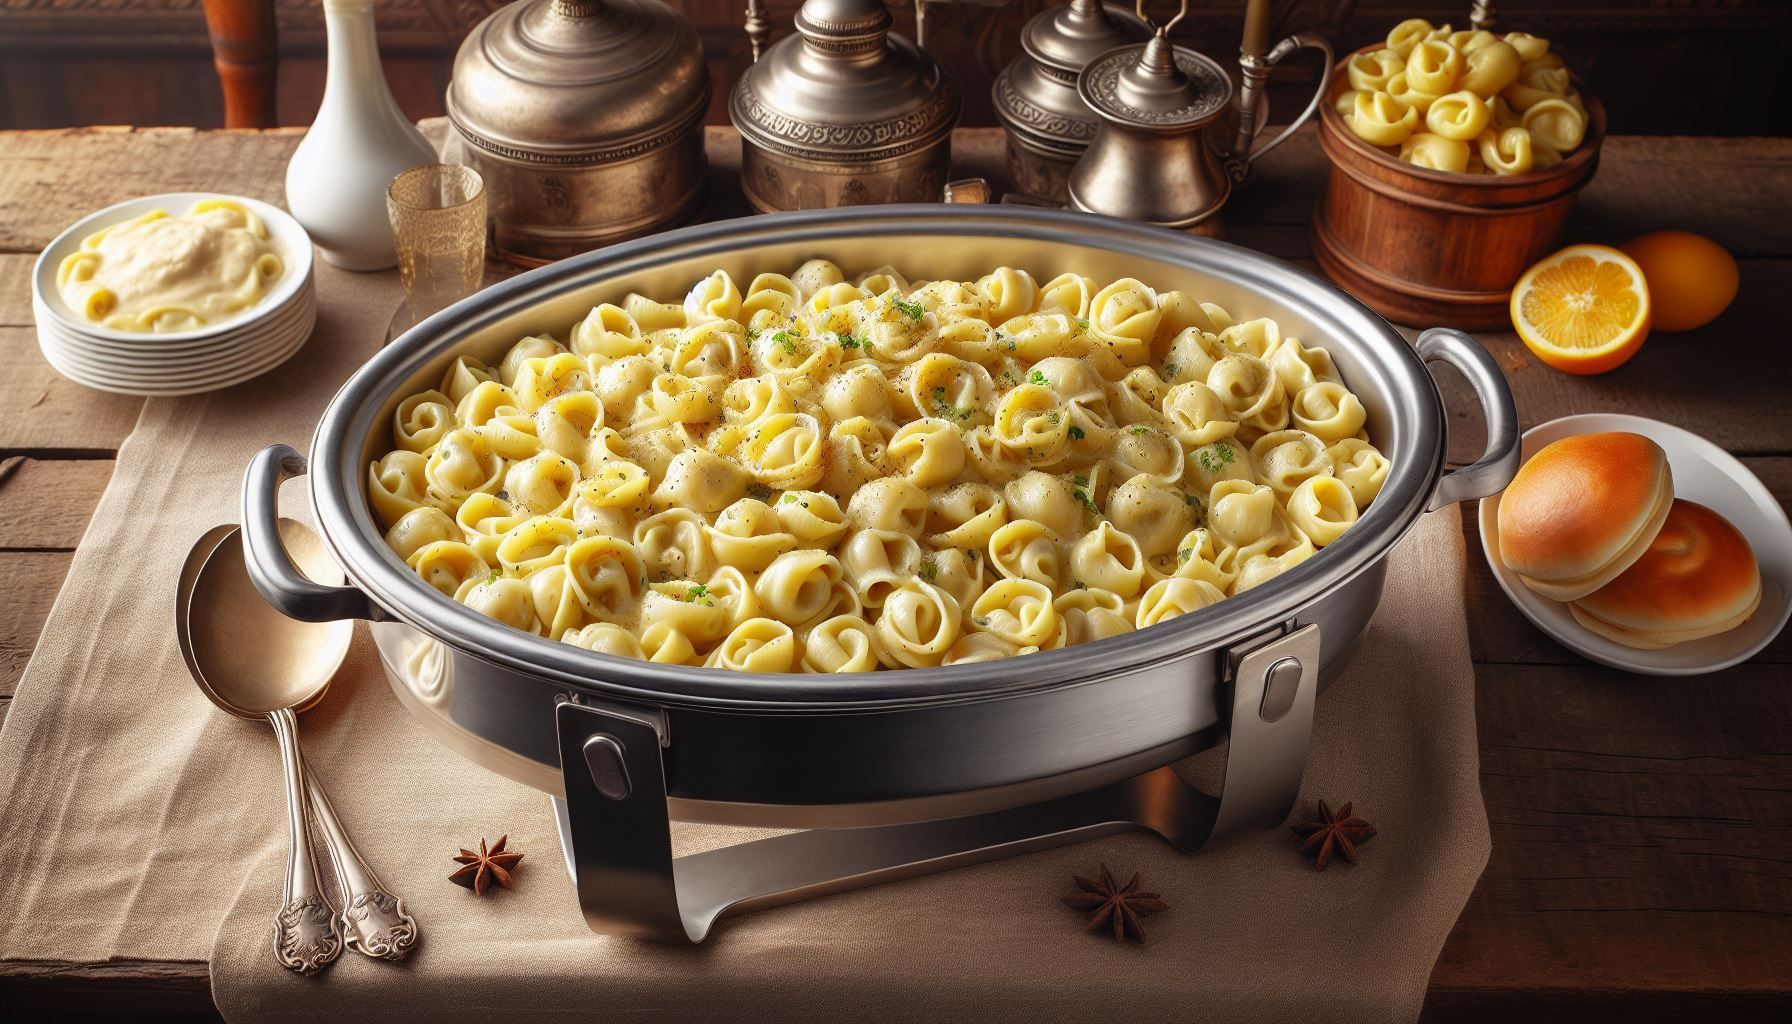 A casserole dish filled with macaroni and cheese is on a table.